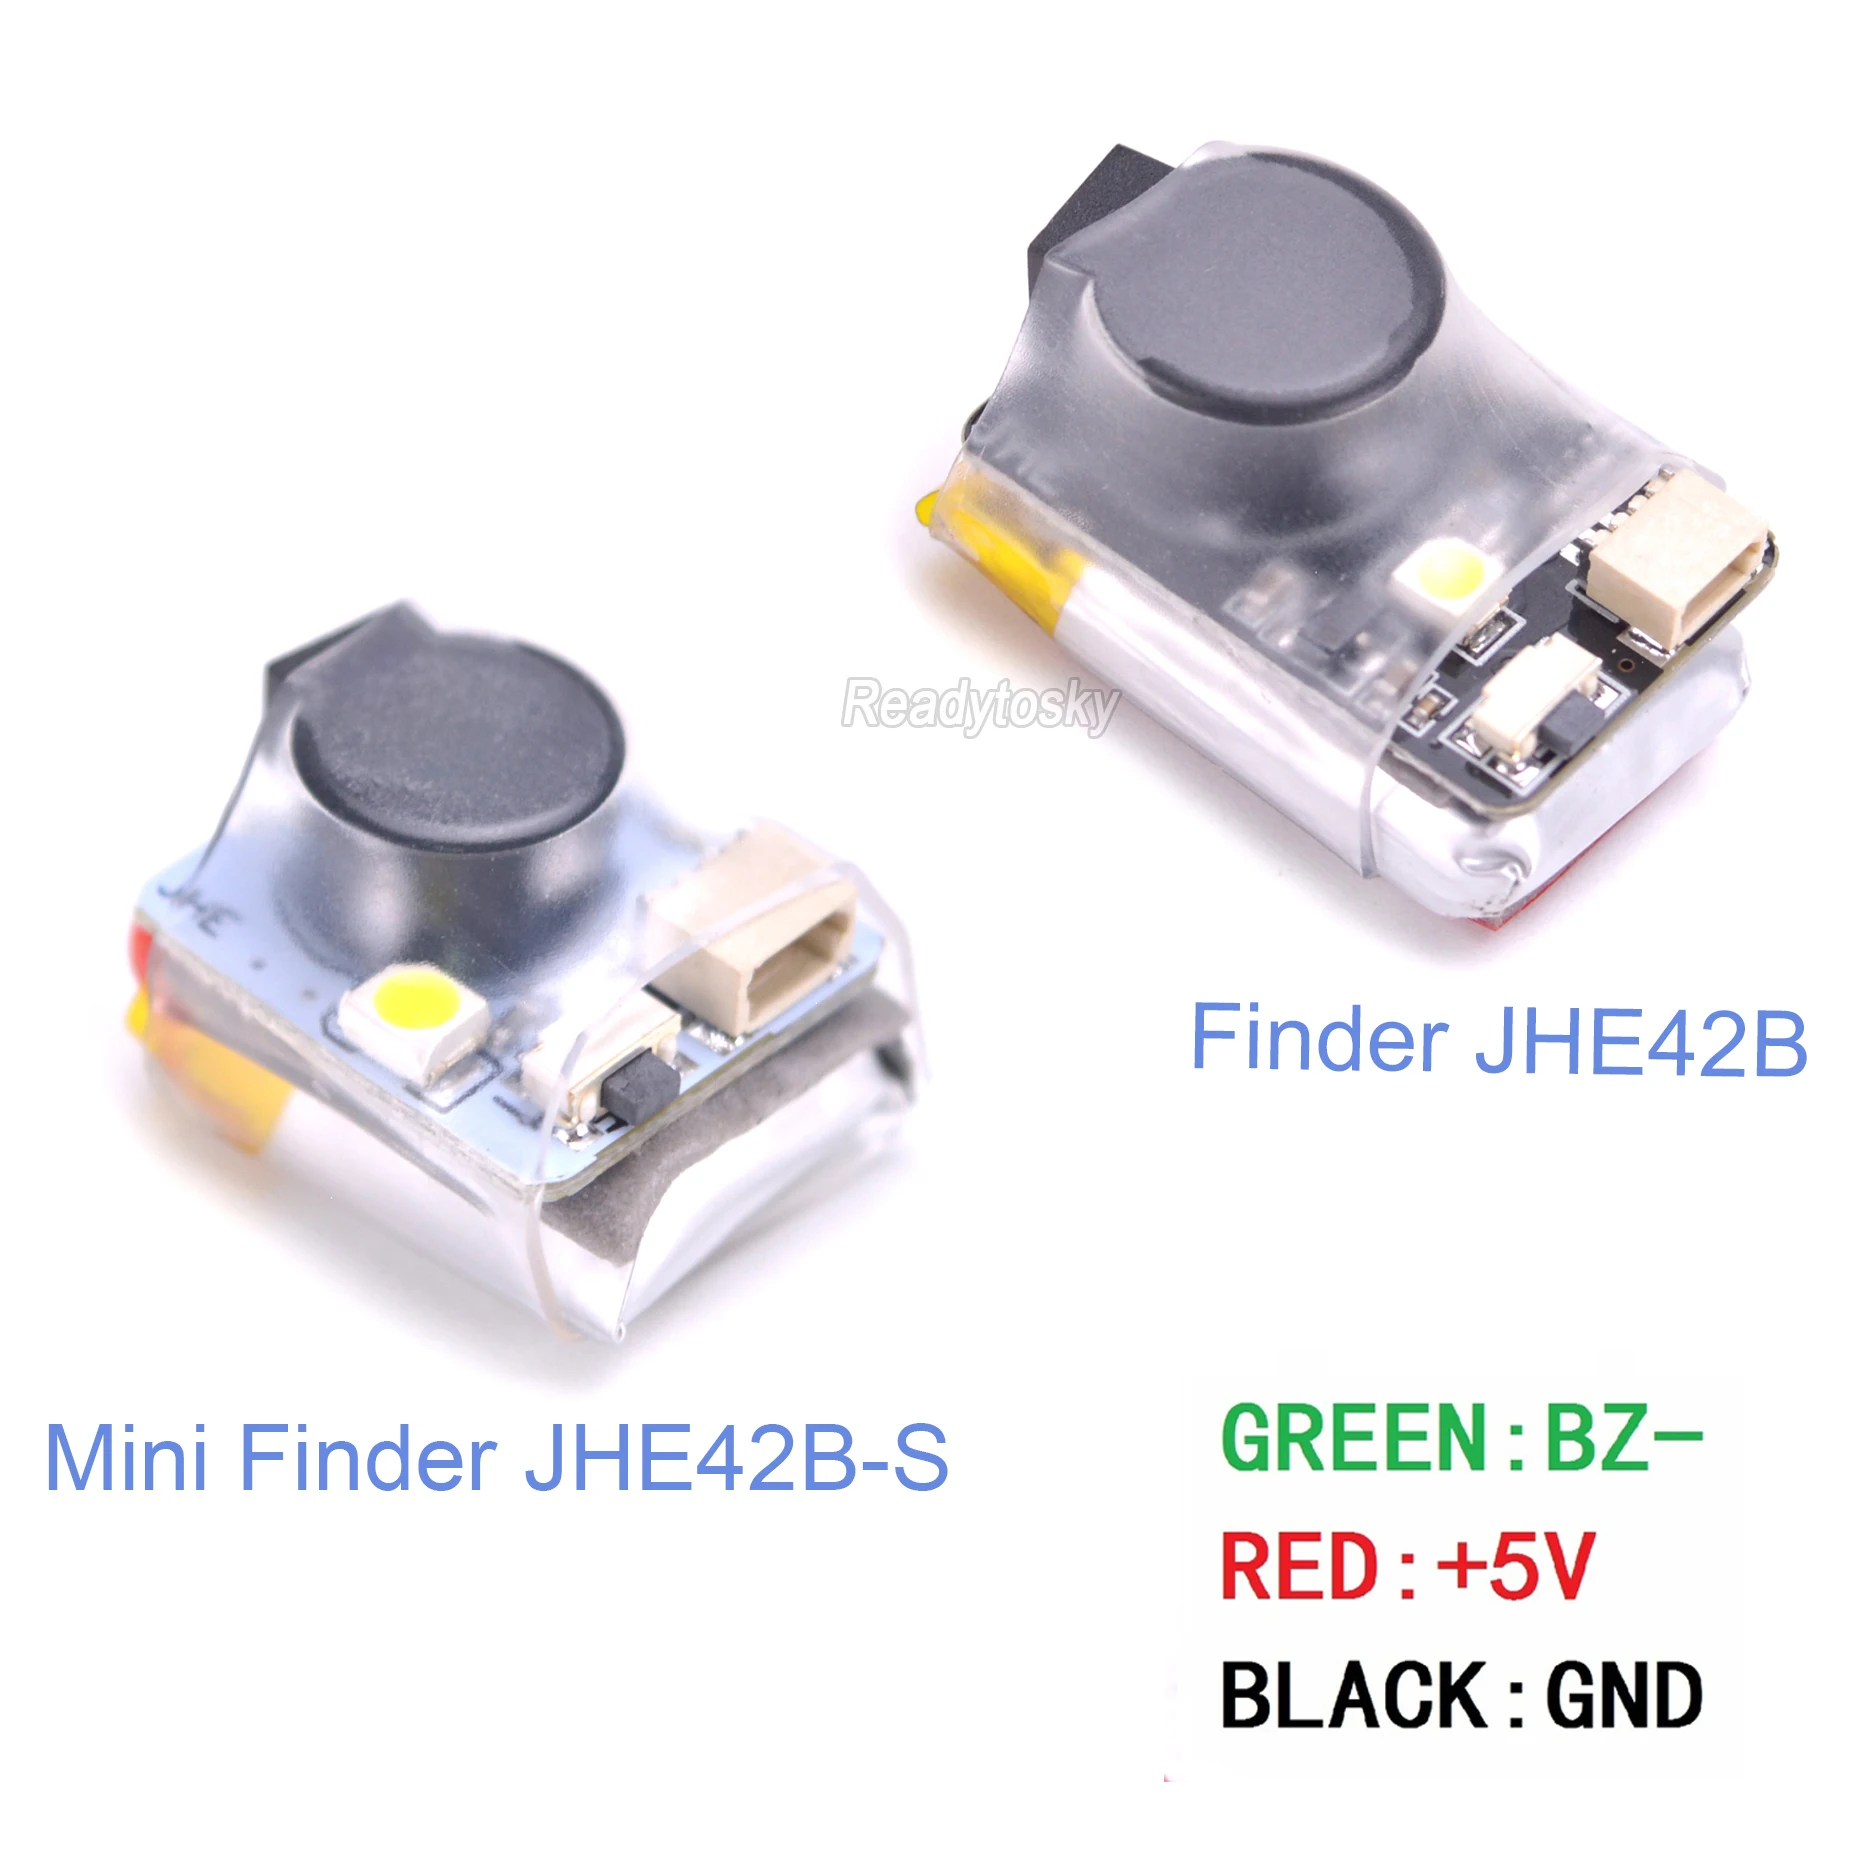 Drone RC Small and light JHE42B_S Finder Lost Model Buzzer Alarm LED Light 